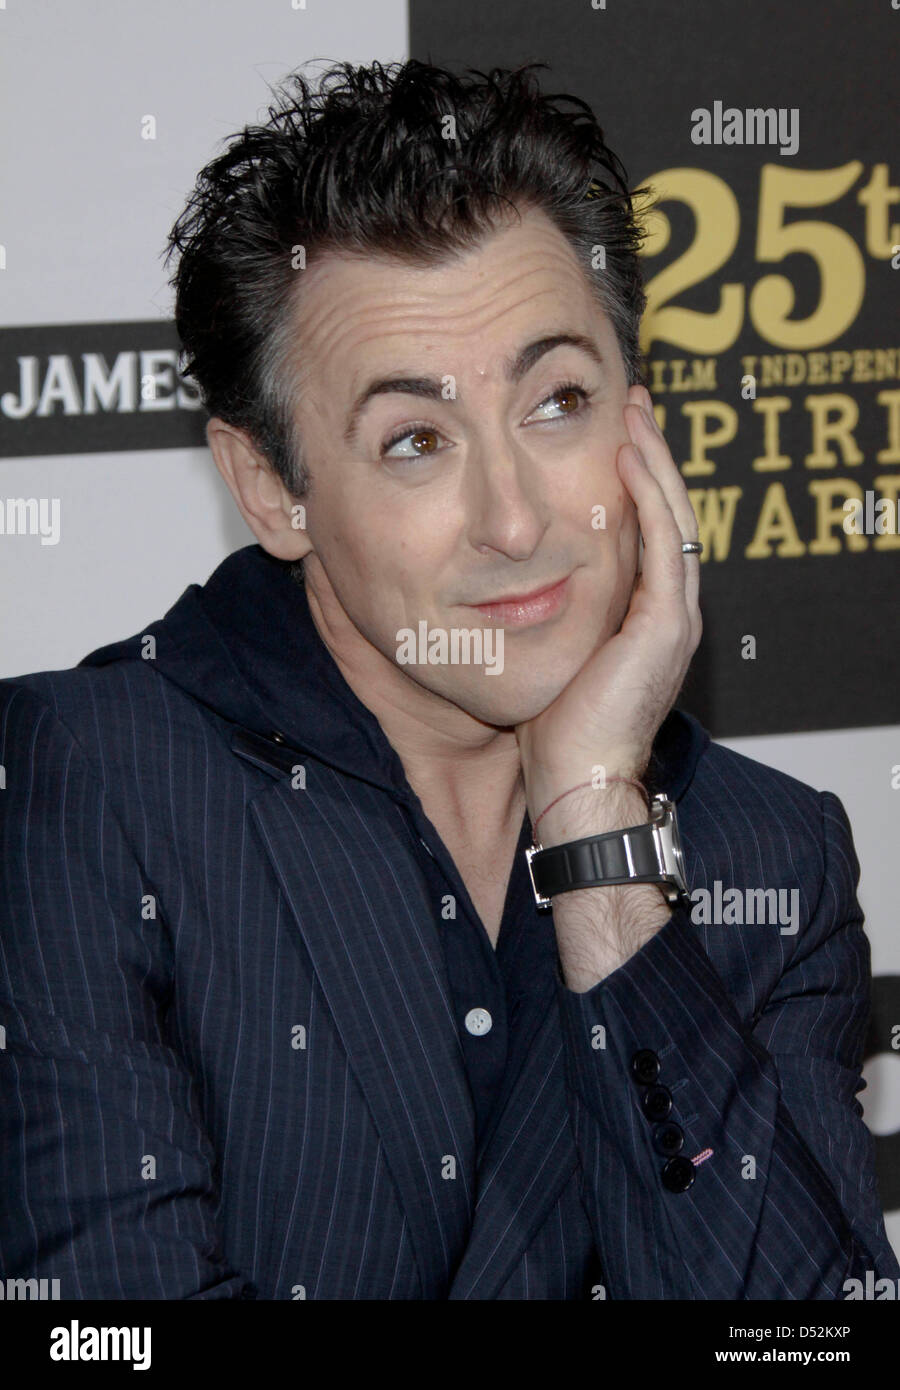 Scottish actor Alan Cumming arrives for the 25th Film Independent ...